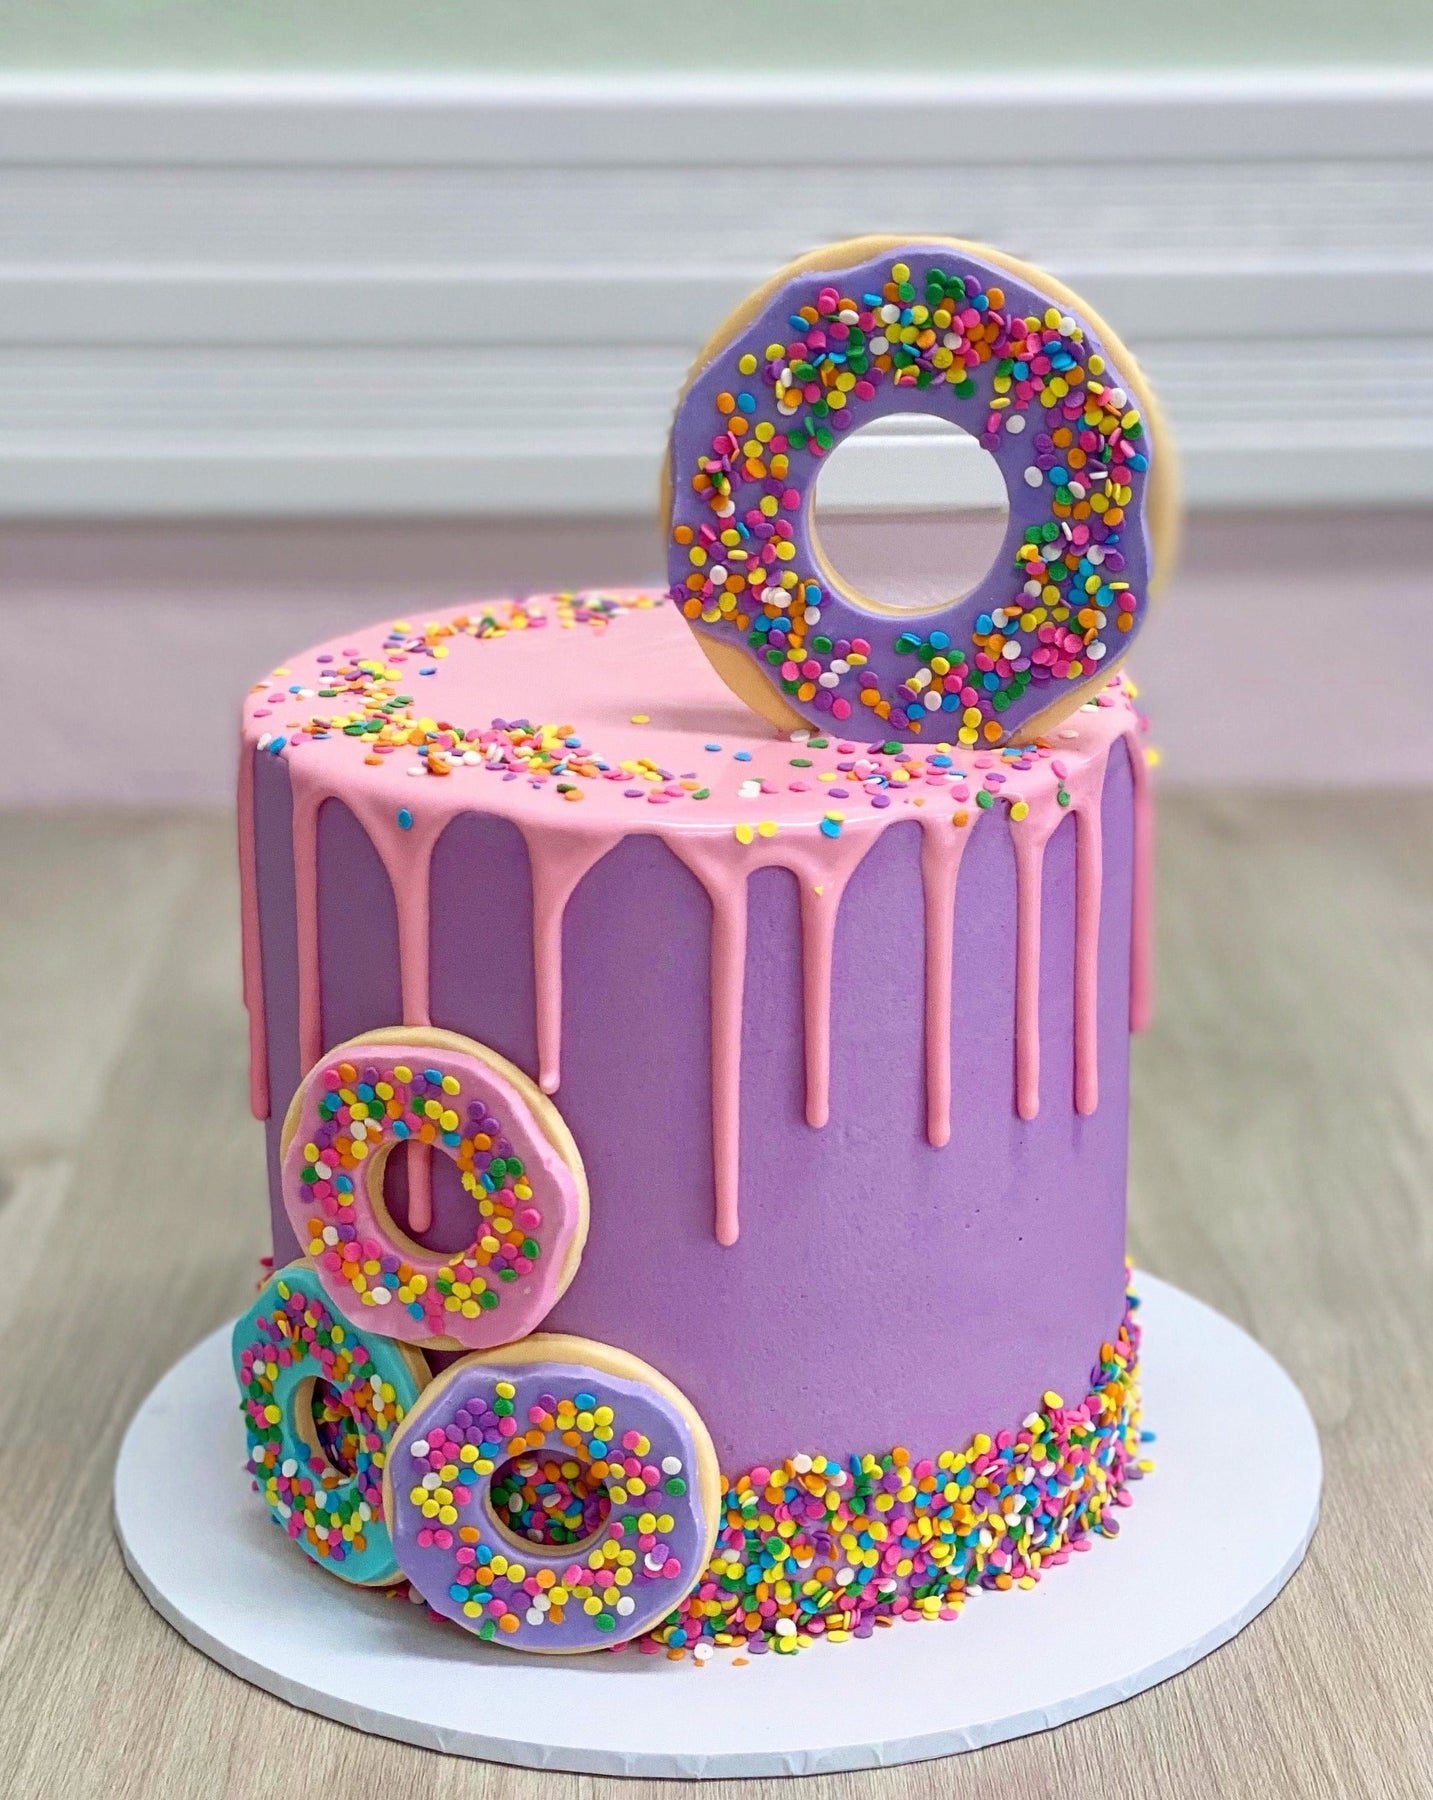 This giant donut cake is the life of any party